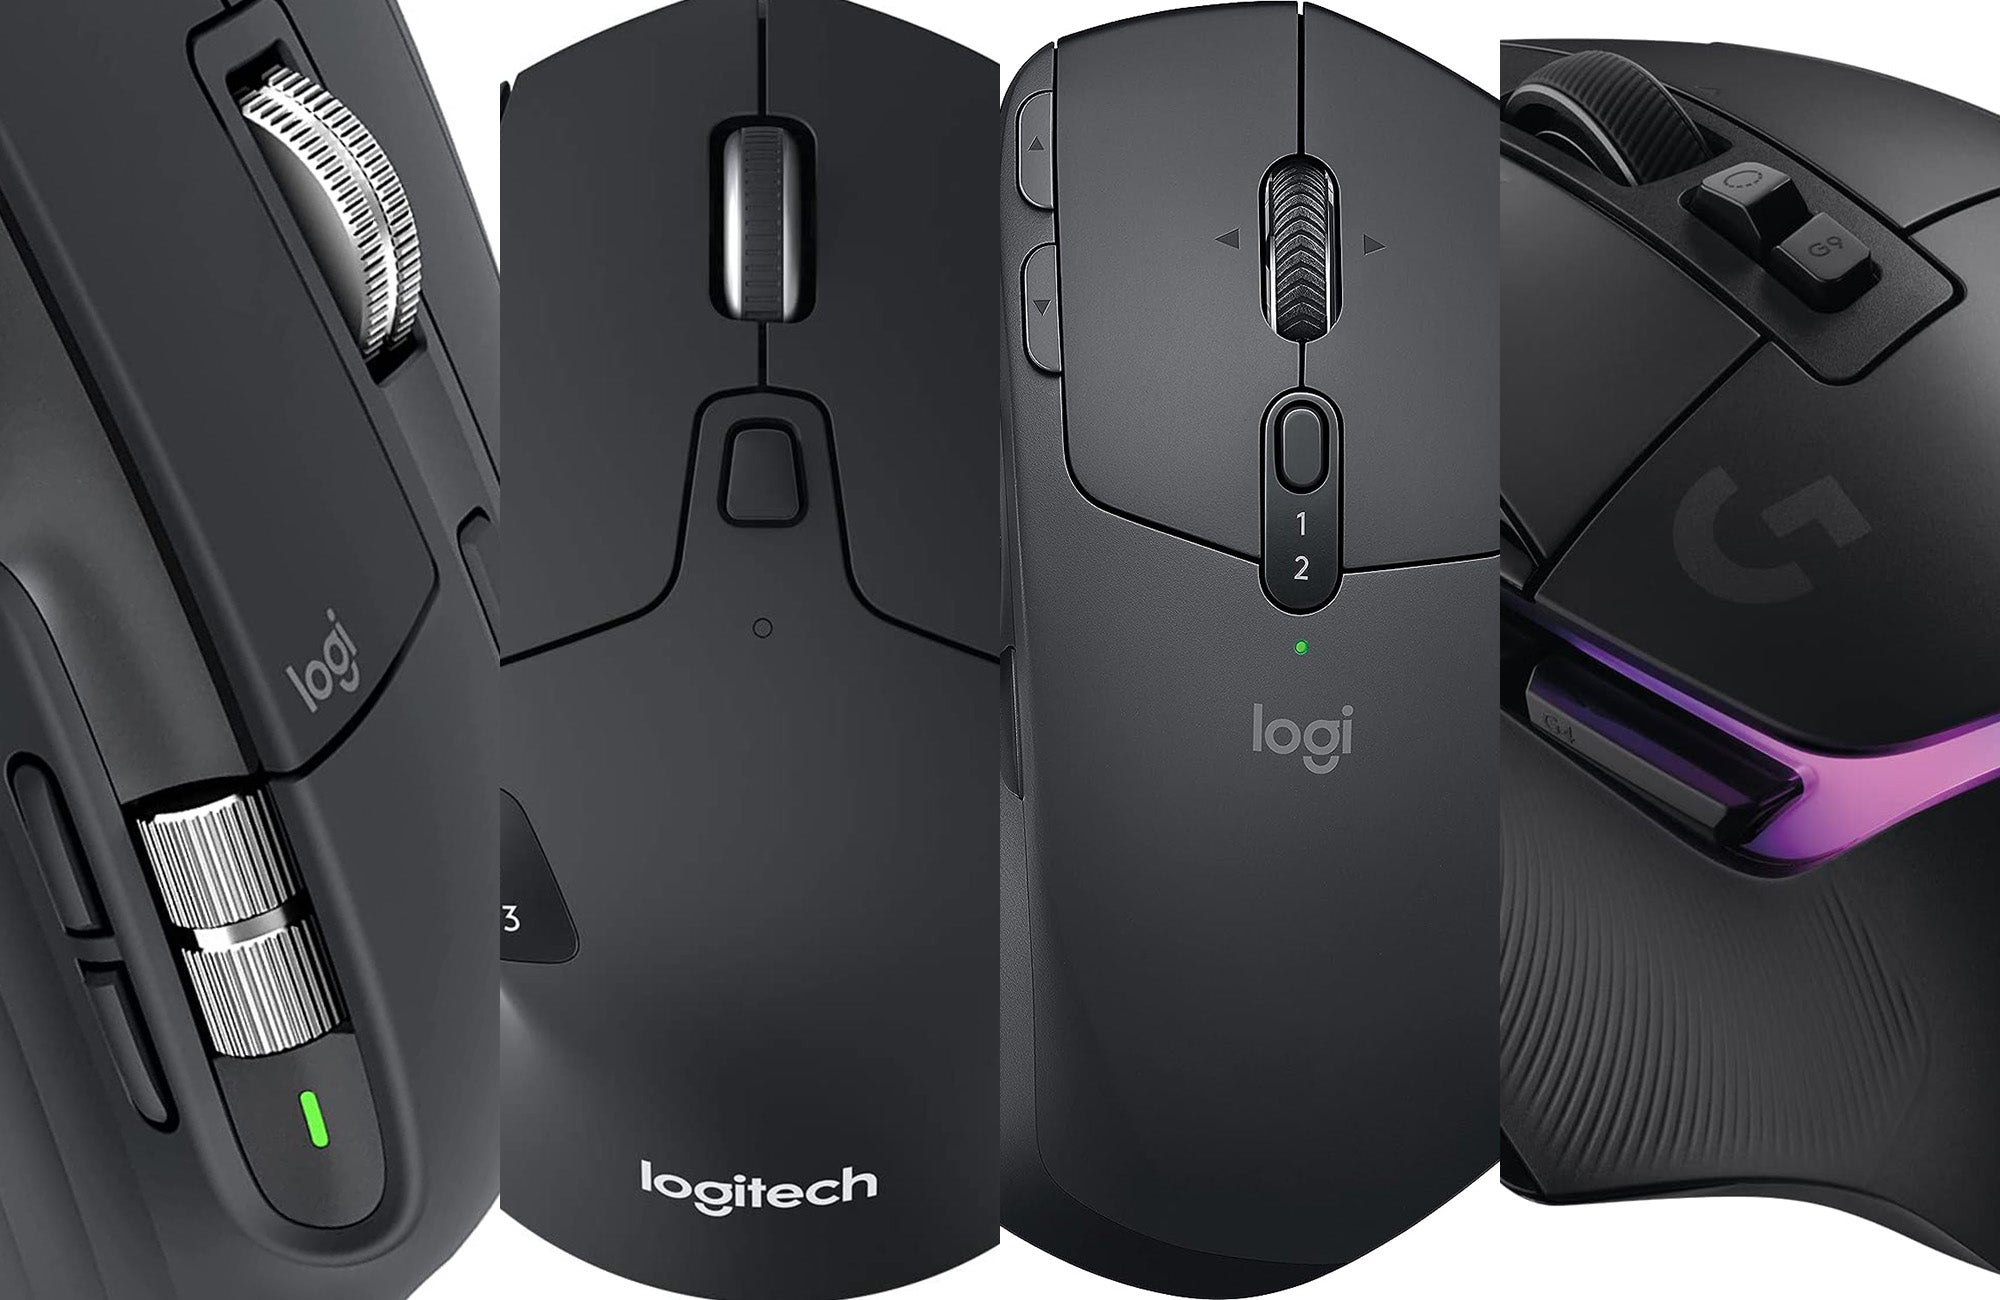 7 Best Mouse Only Games You Can Play Right Now 